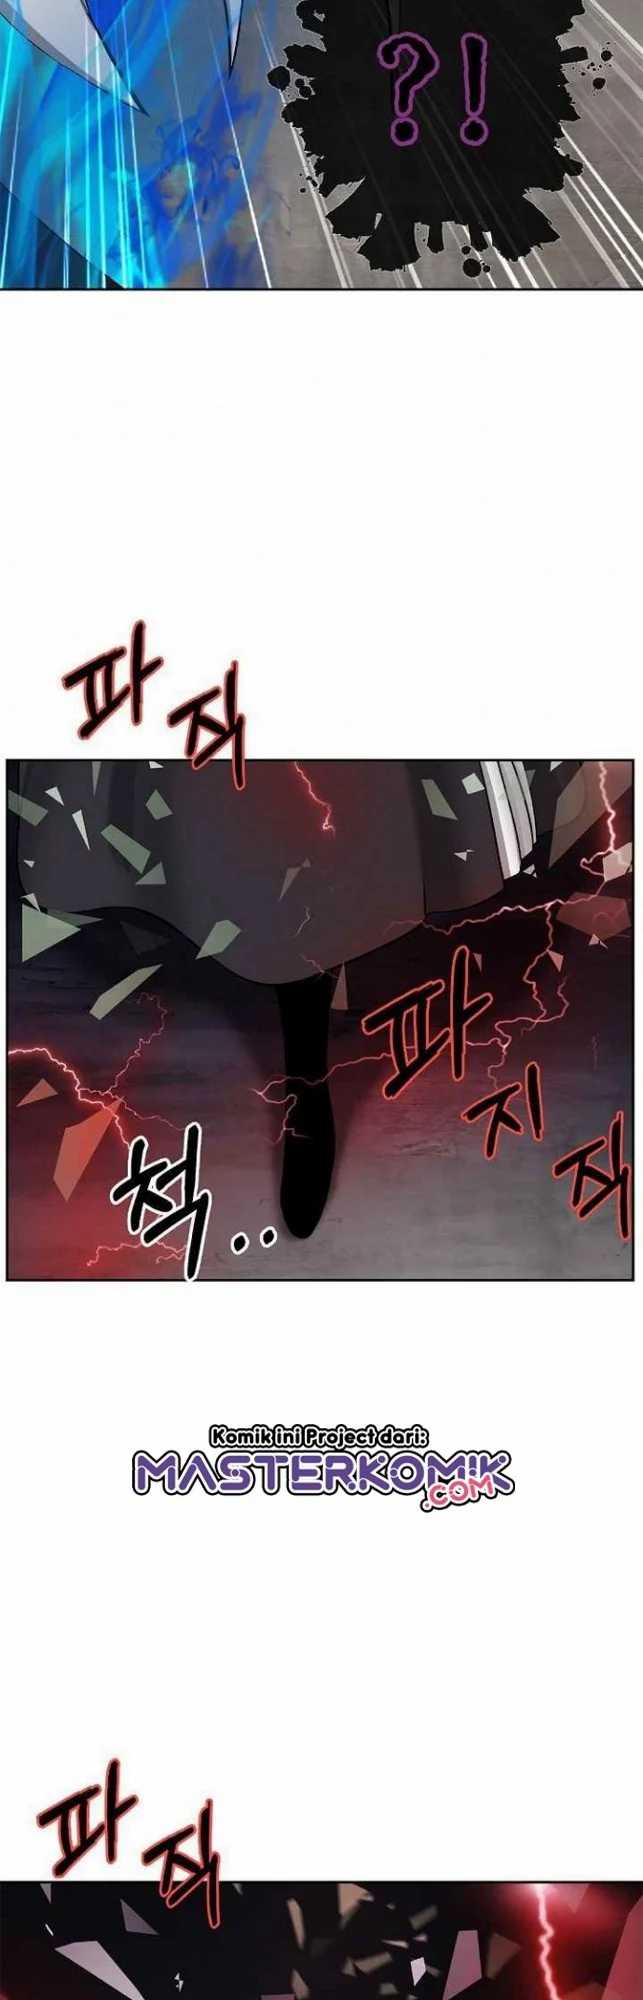 Cystic Story (Call The Spear) Chapter 44